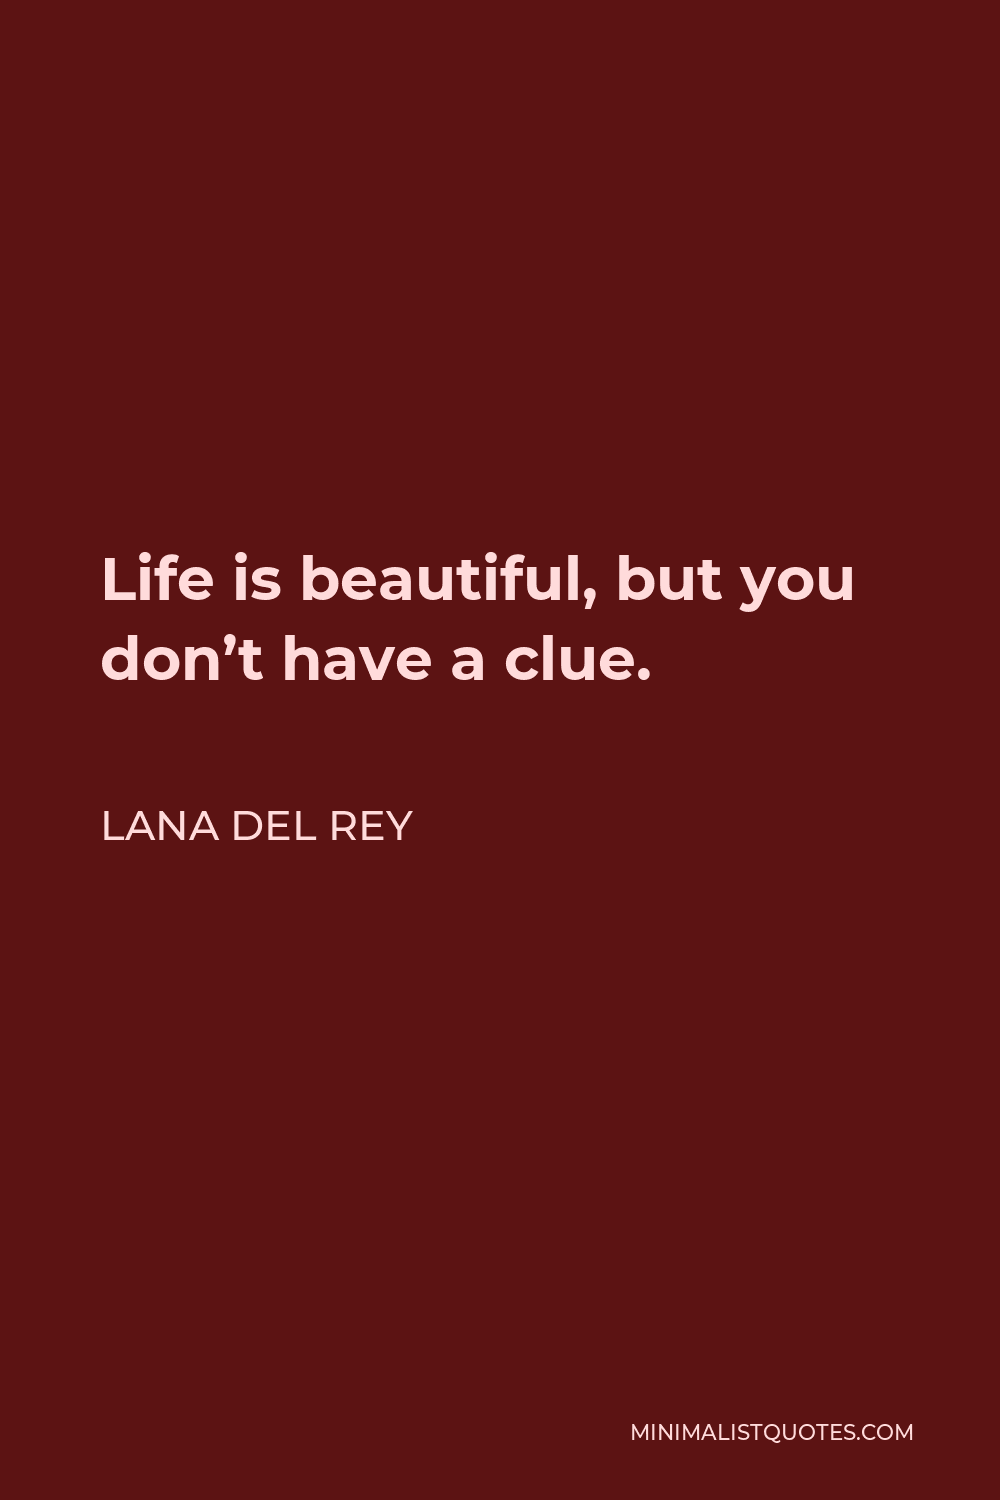 Lana Del Rey Quote - Life is beautiful, but you don’t have a clue.